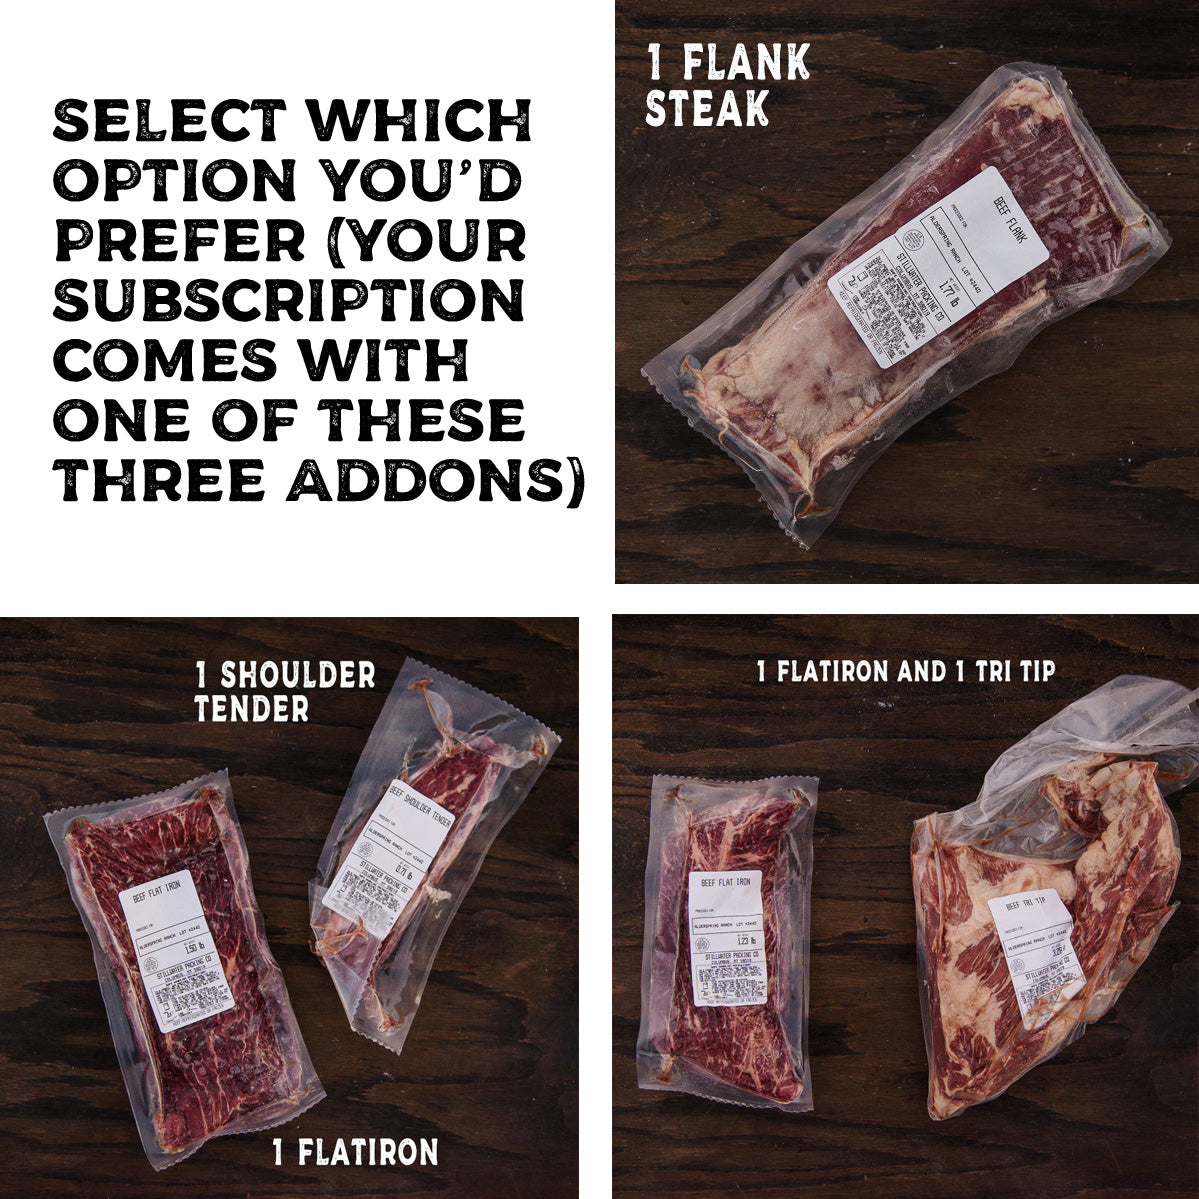 Steak Lover's Subscription Share (15+ lbs)